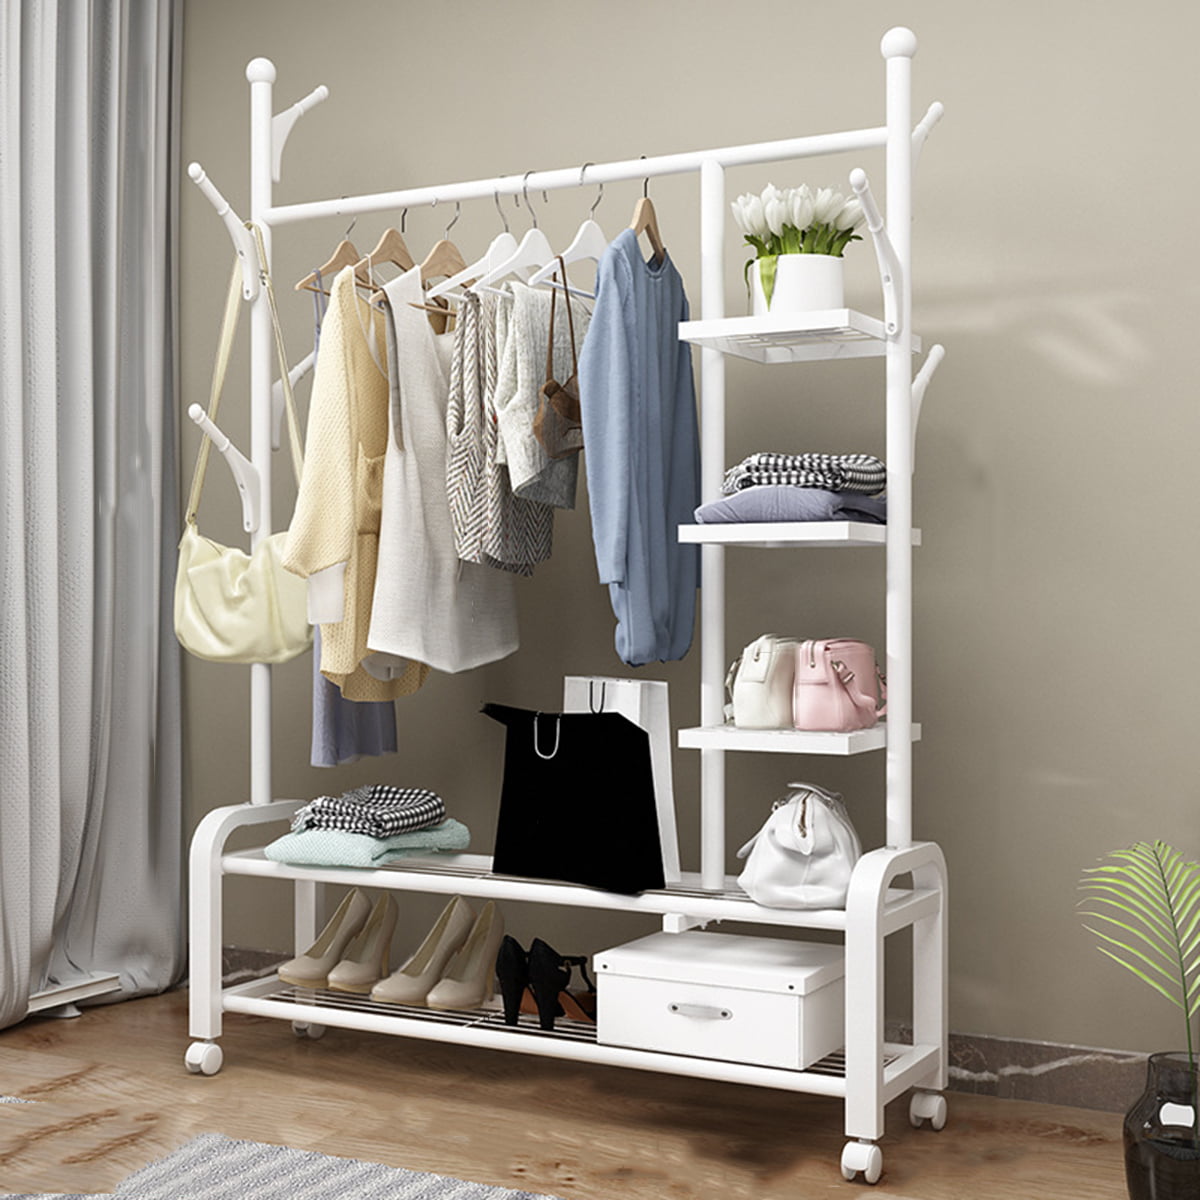 Metal Cloth Hanger Rack Stand Clothes Drying Rack for Hanging Clothes,with Top Rod Organizer Shirt and Lower Storage Shelf for Boxes Shoes Boots GISSAR Clothing Garment Rack with Shelves 